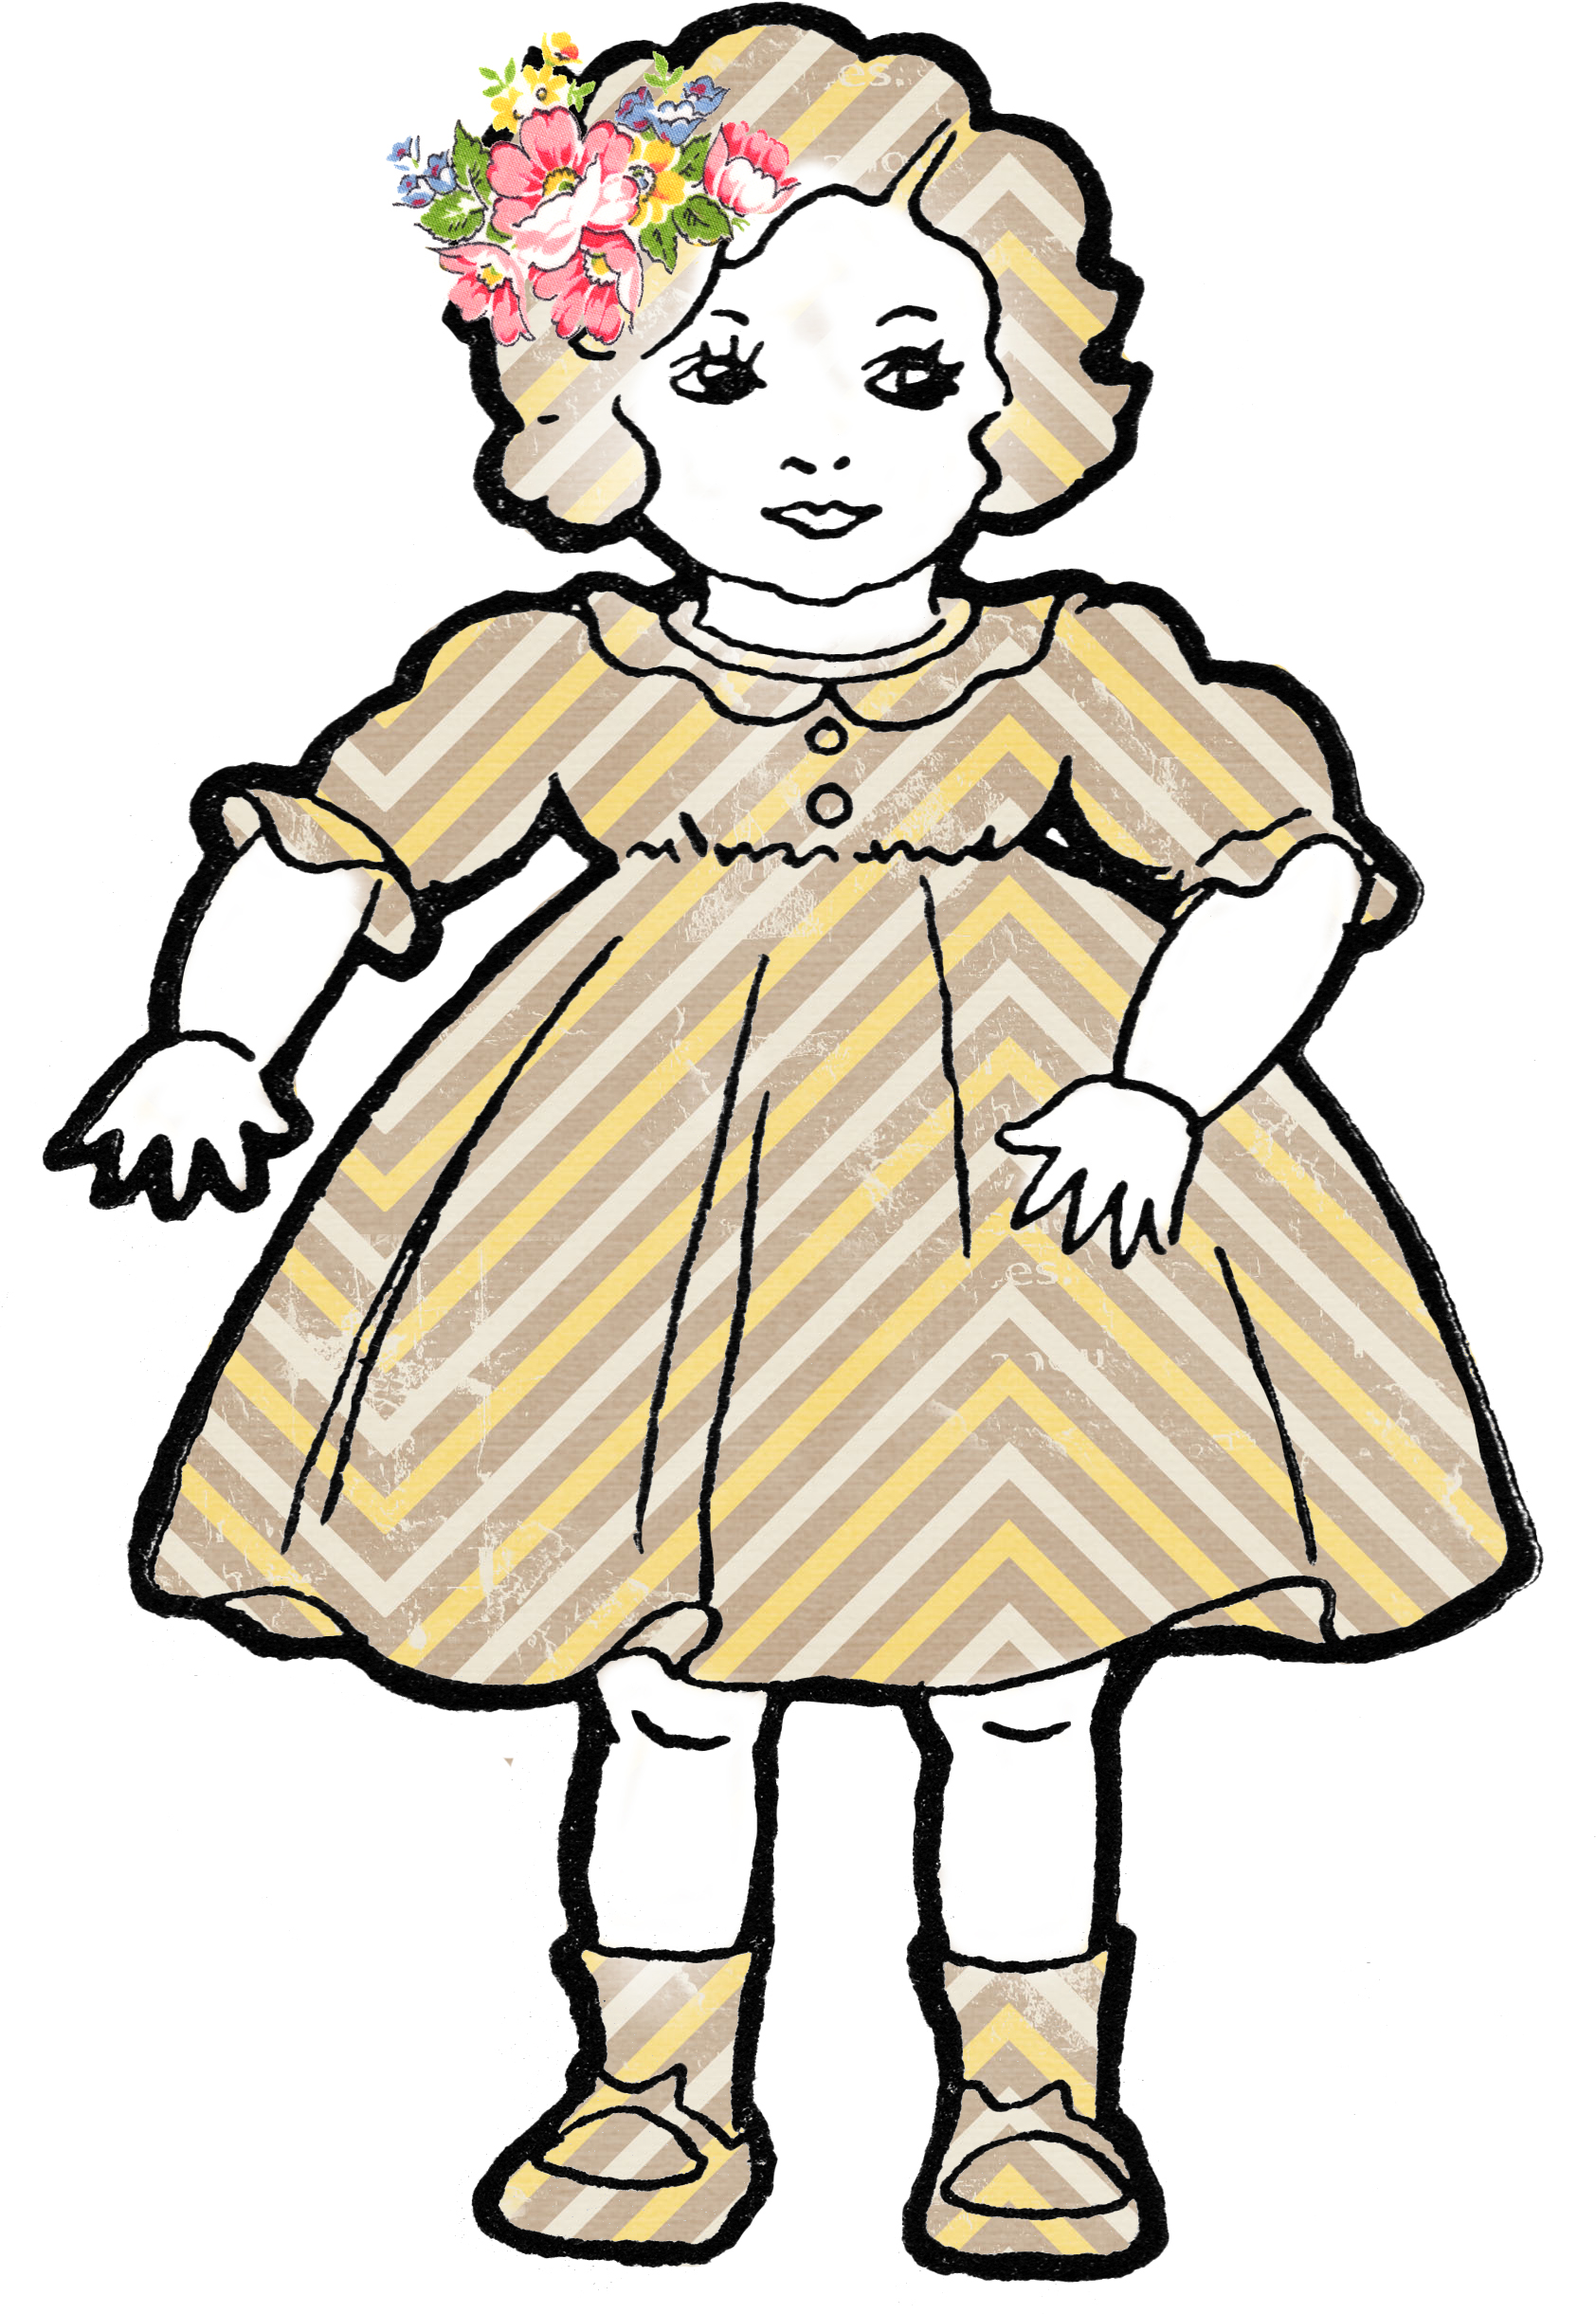 Doll Clipart Black And White | Clipart Panda - Free Clipart Images